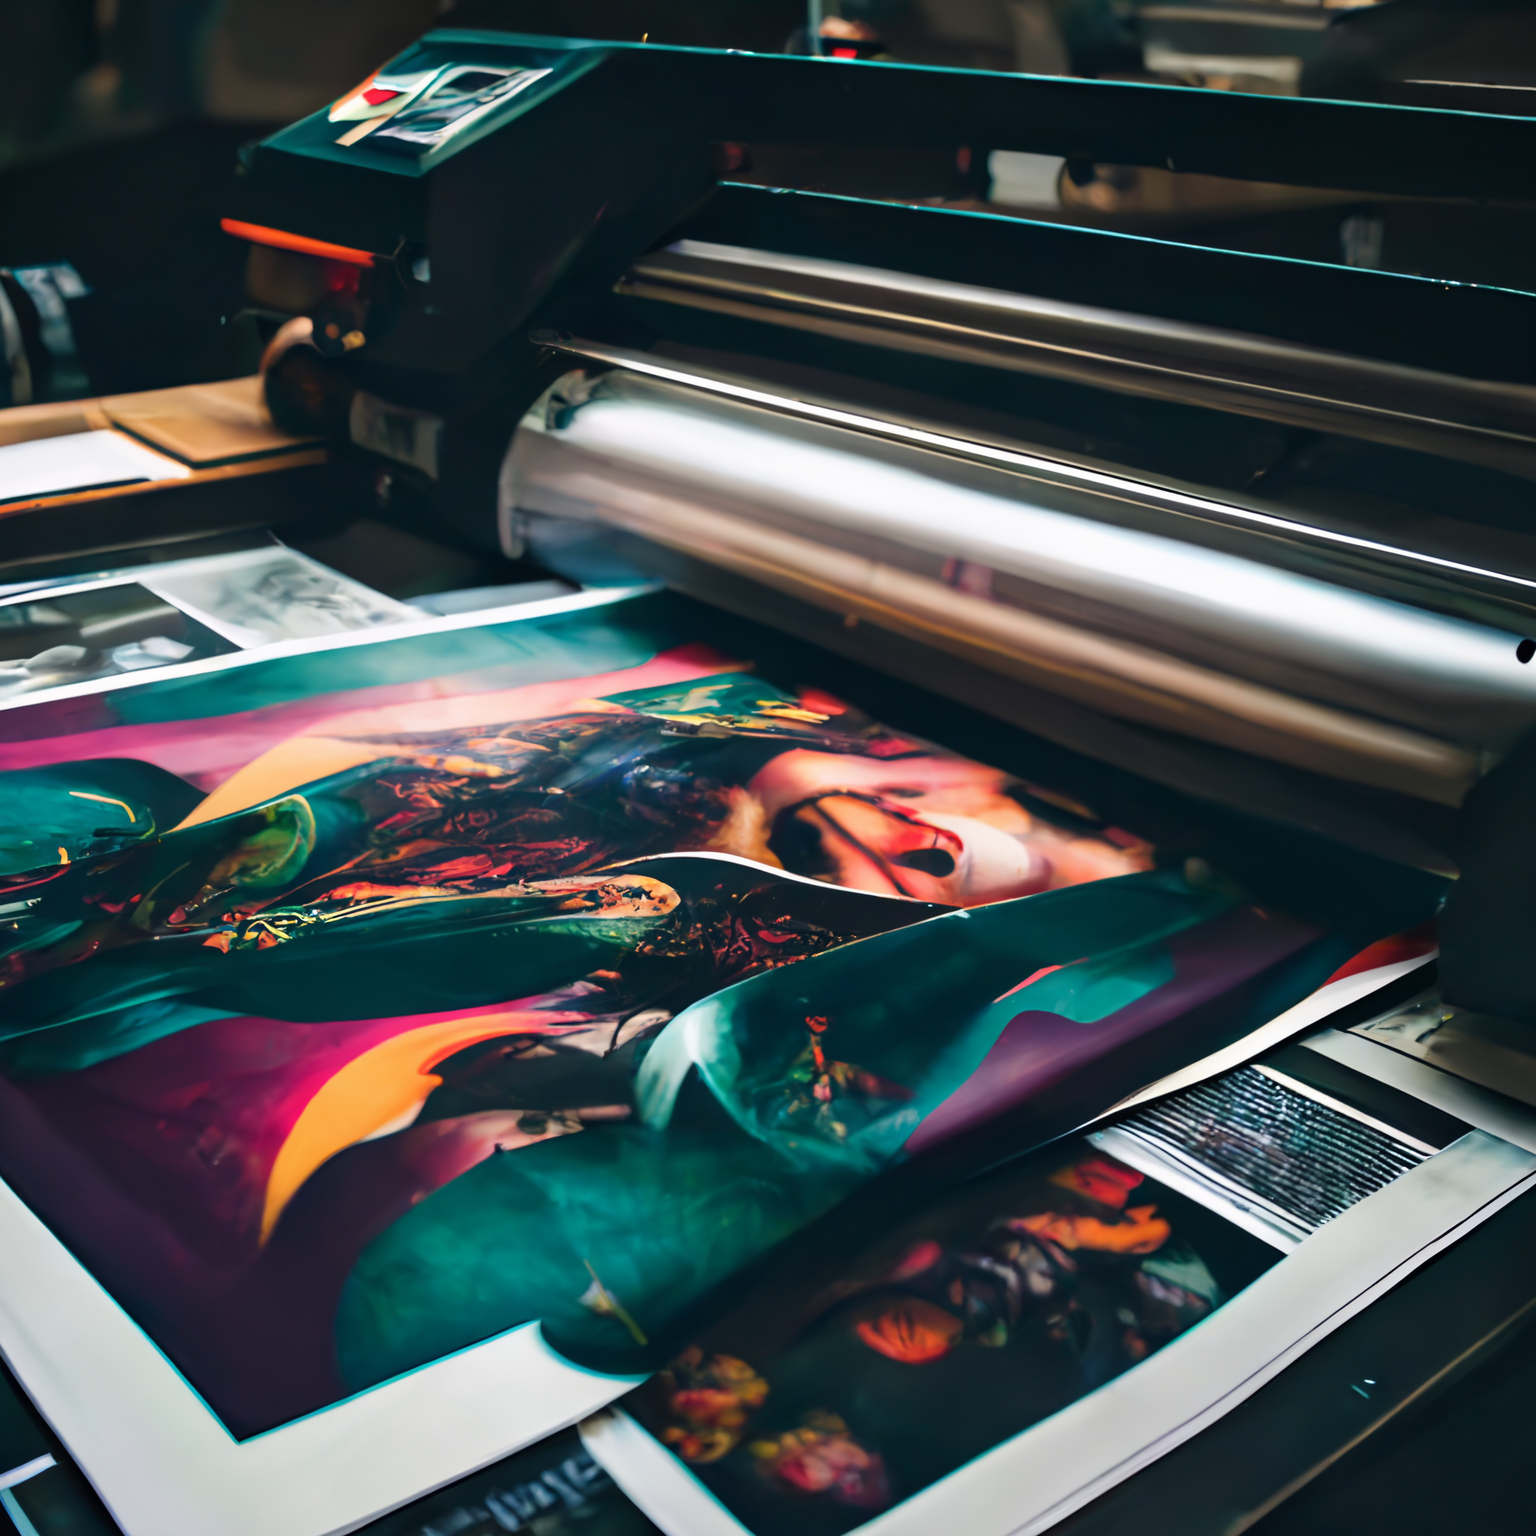 High-quality printing in marketing